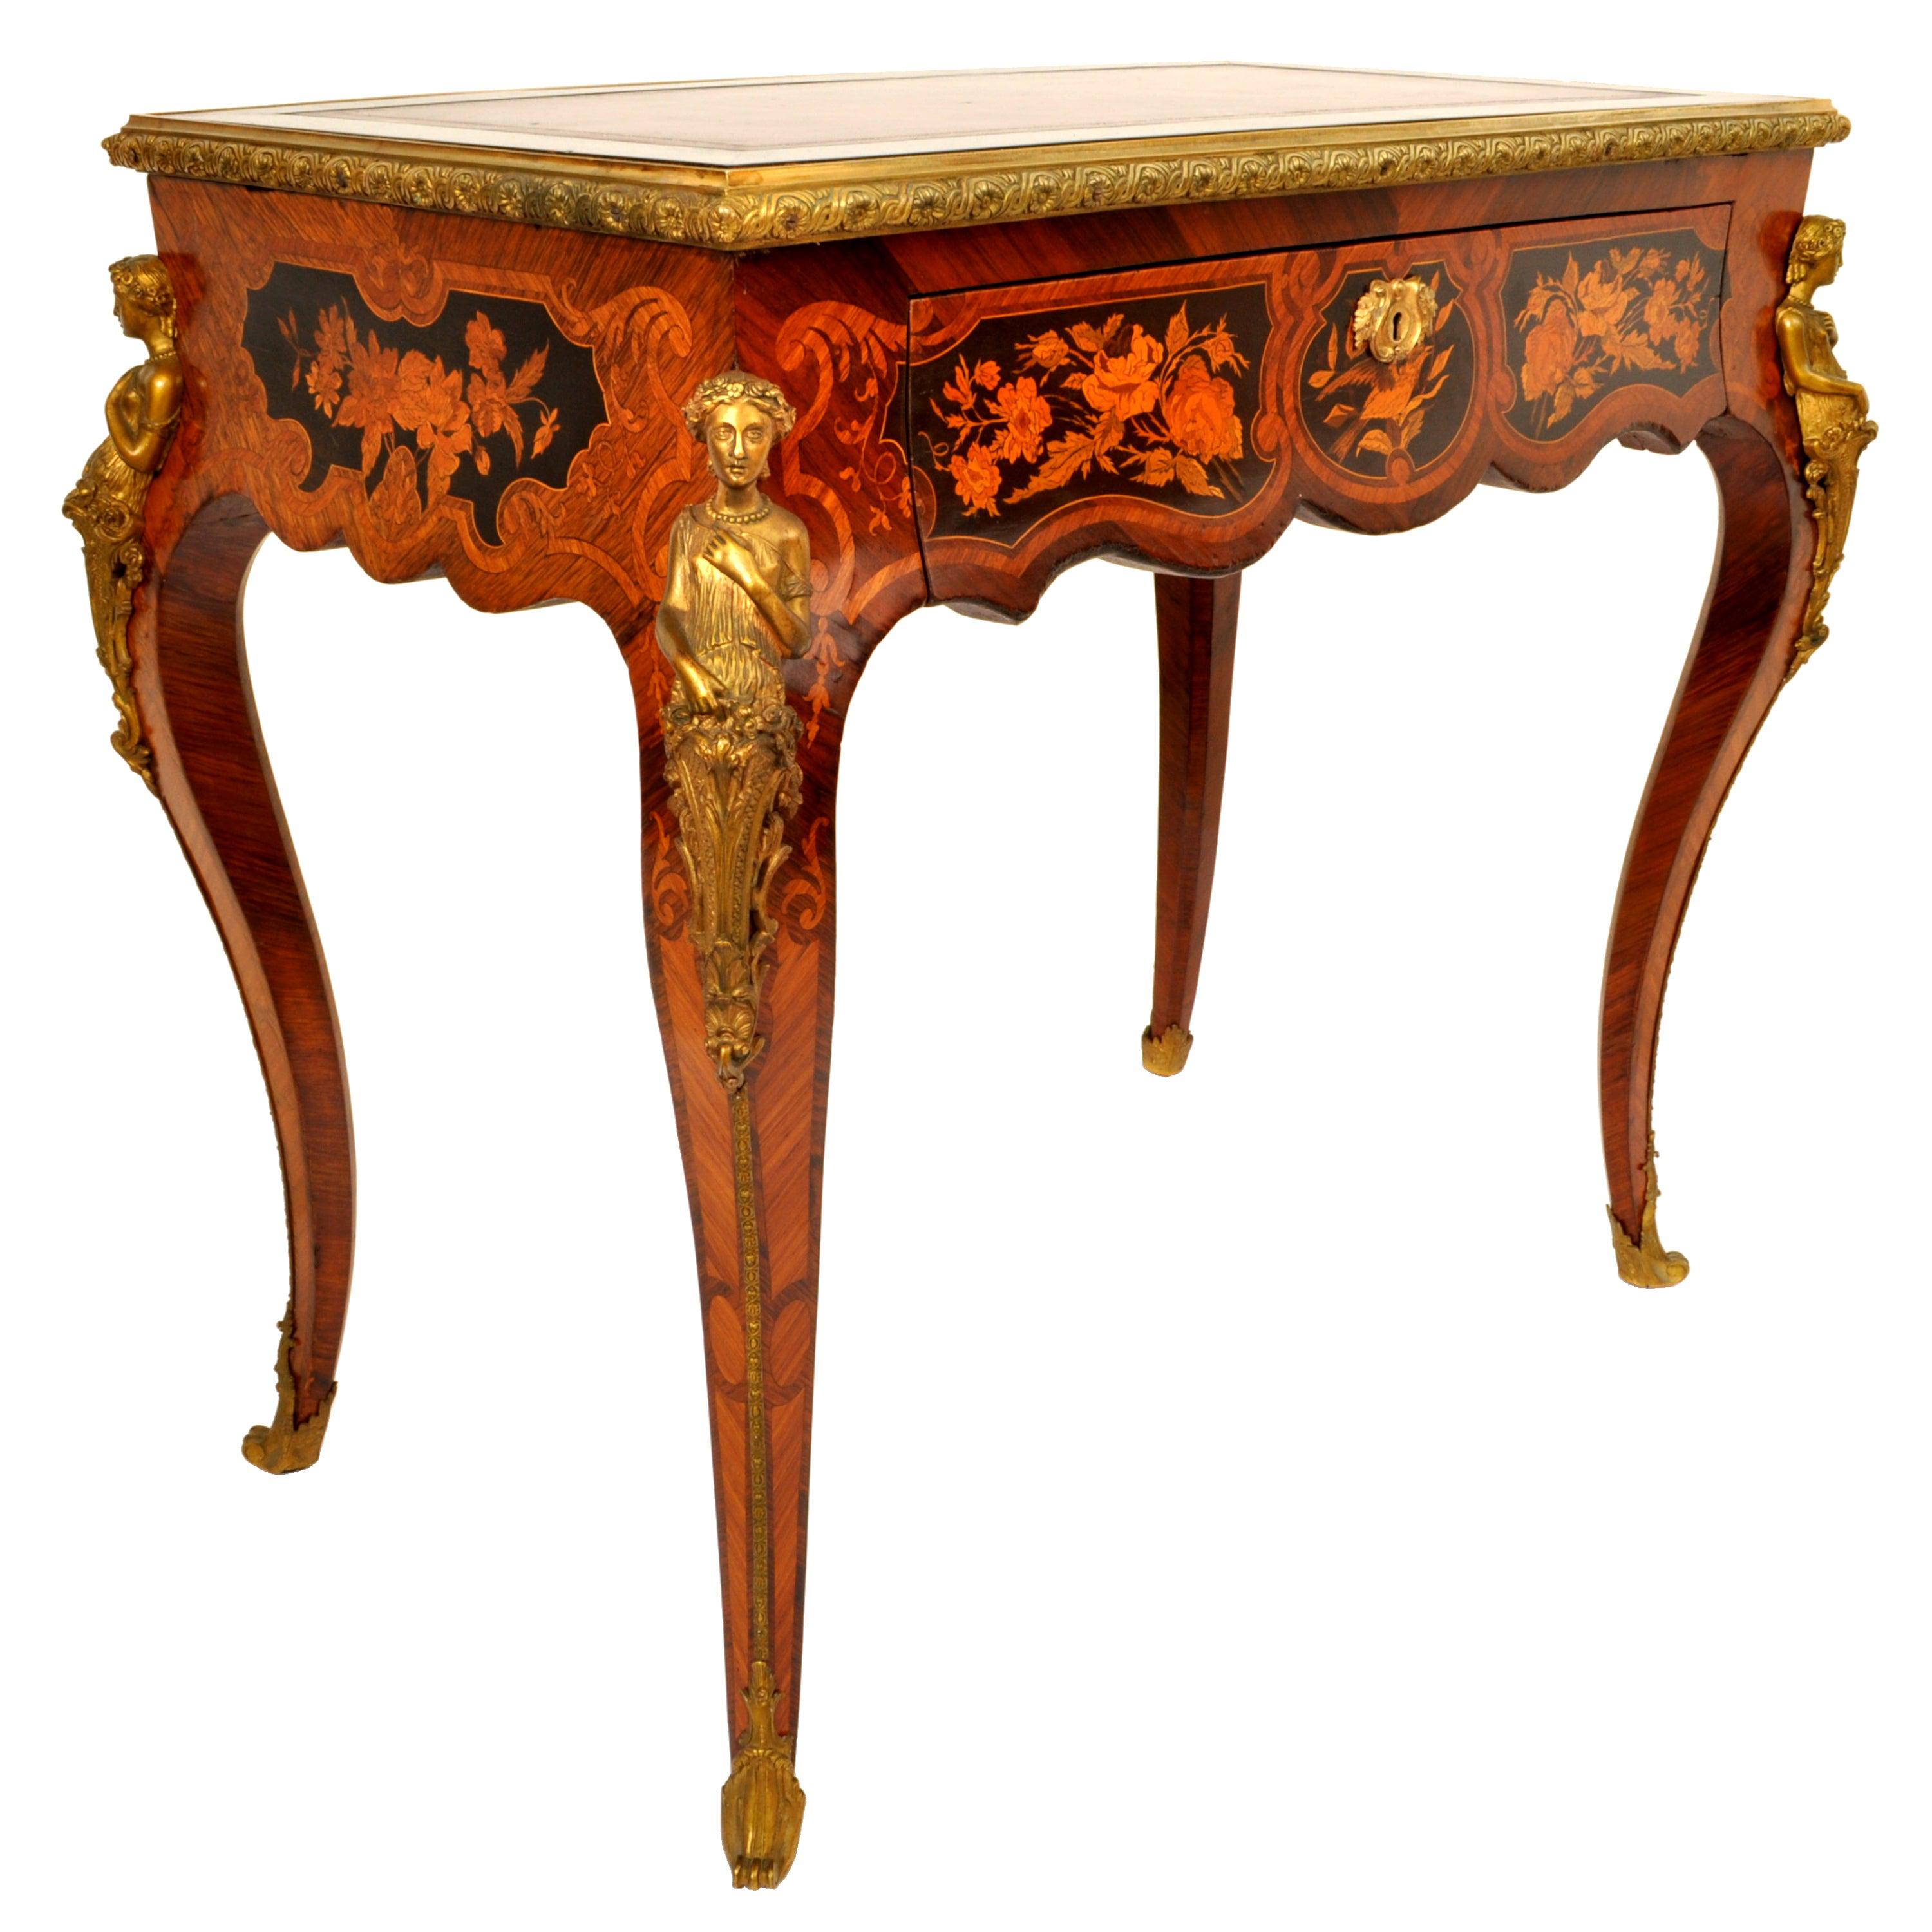 Antique French 19th Century Louis XVI Marquetry Ormolu Writing Desk Table 1895